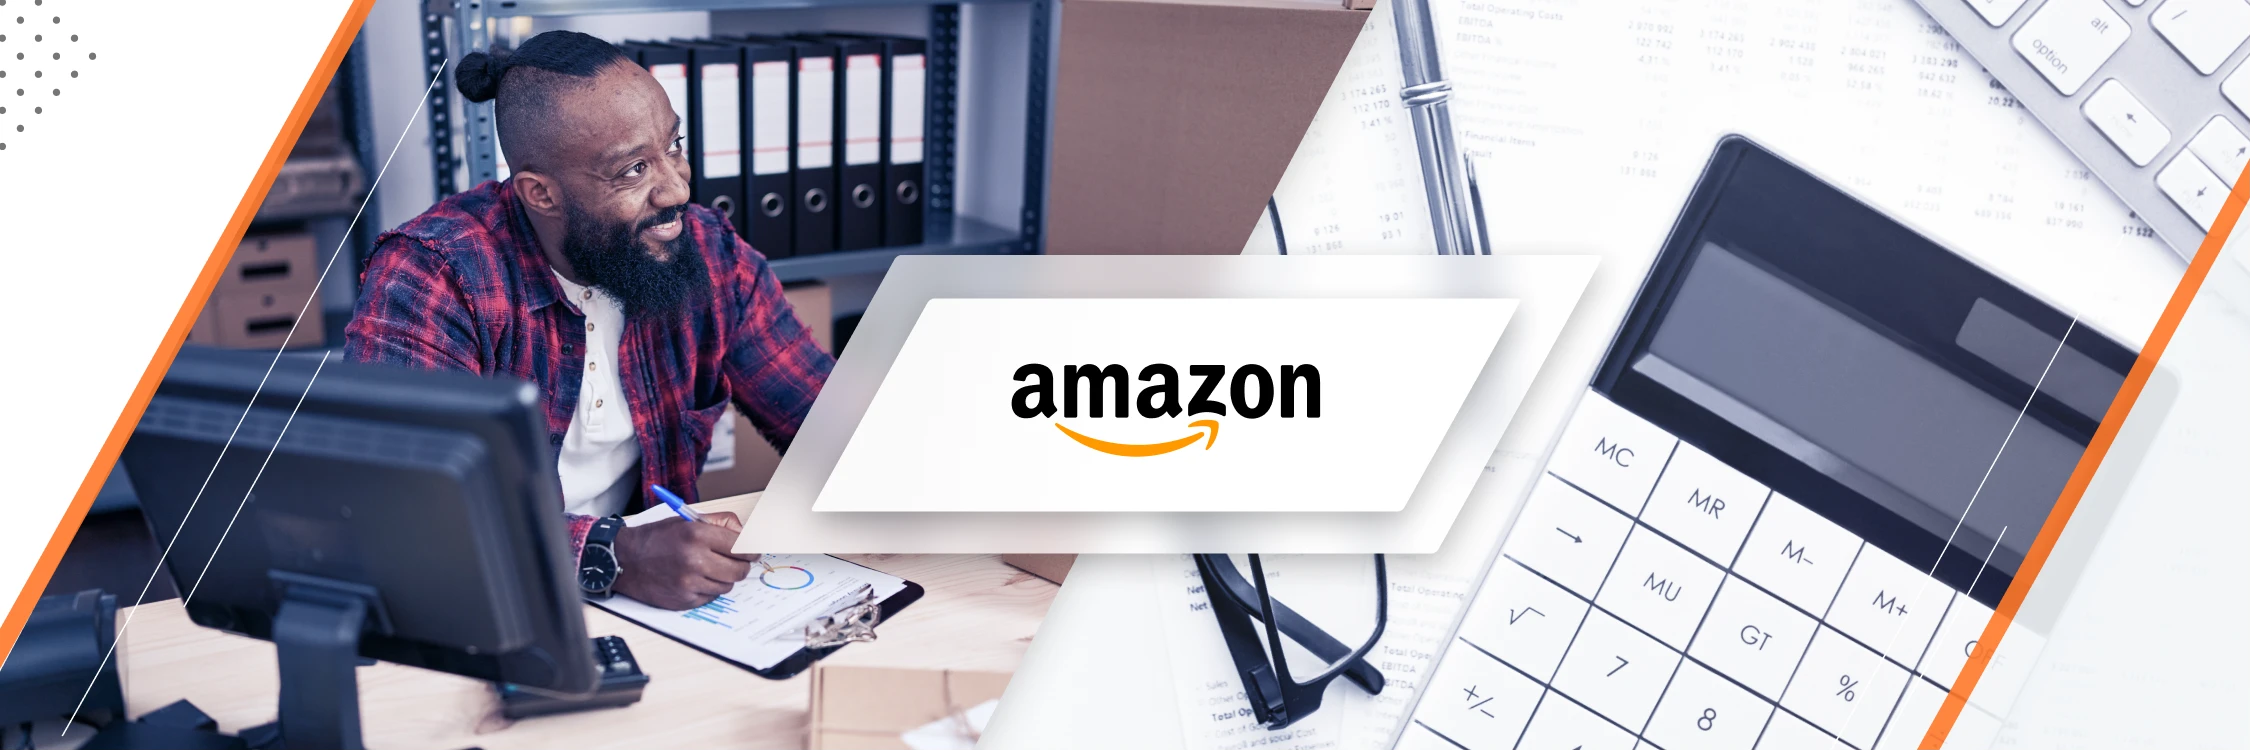 6 Amazon Accounting Problems Solved